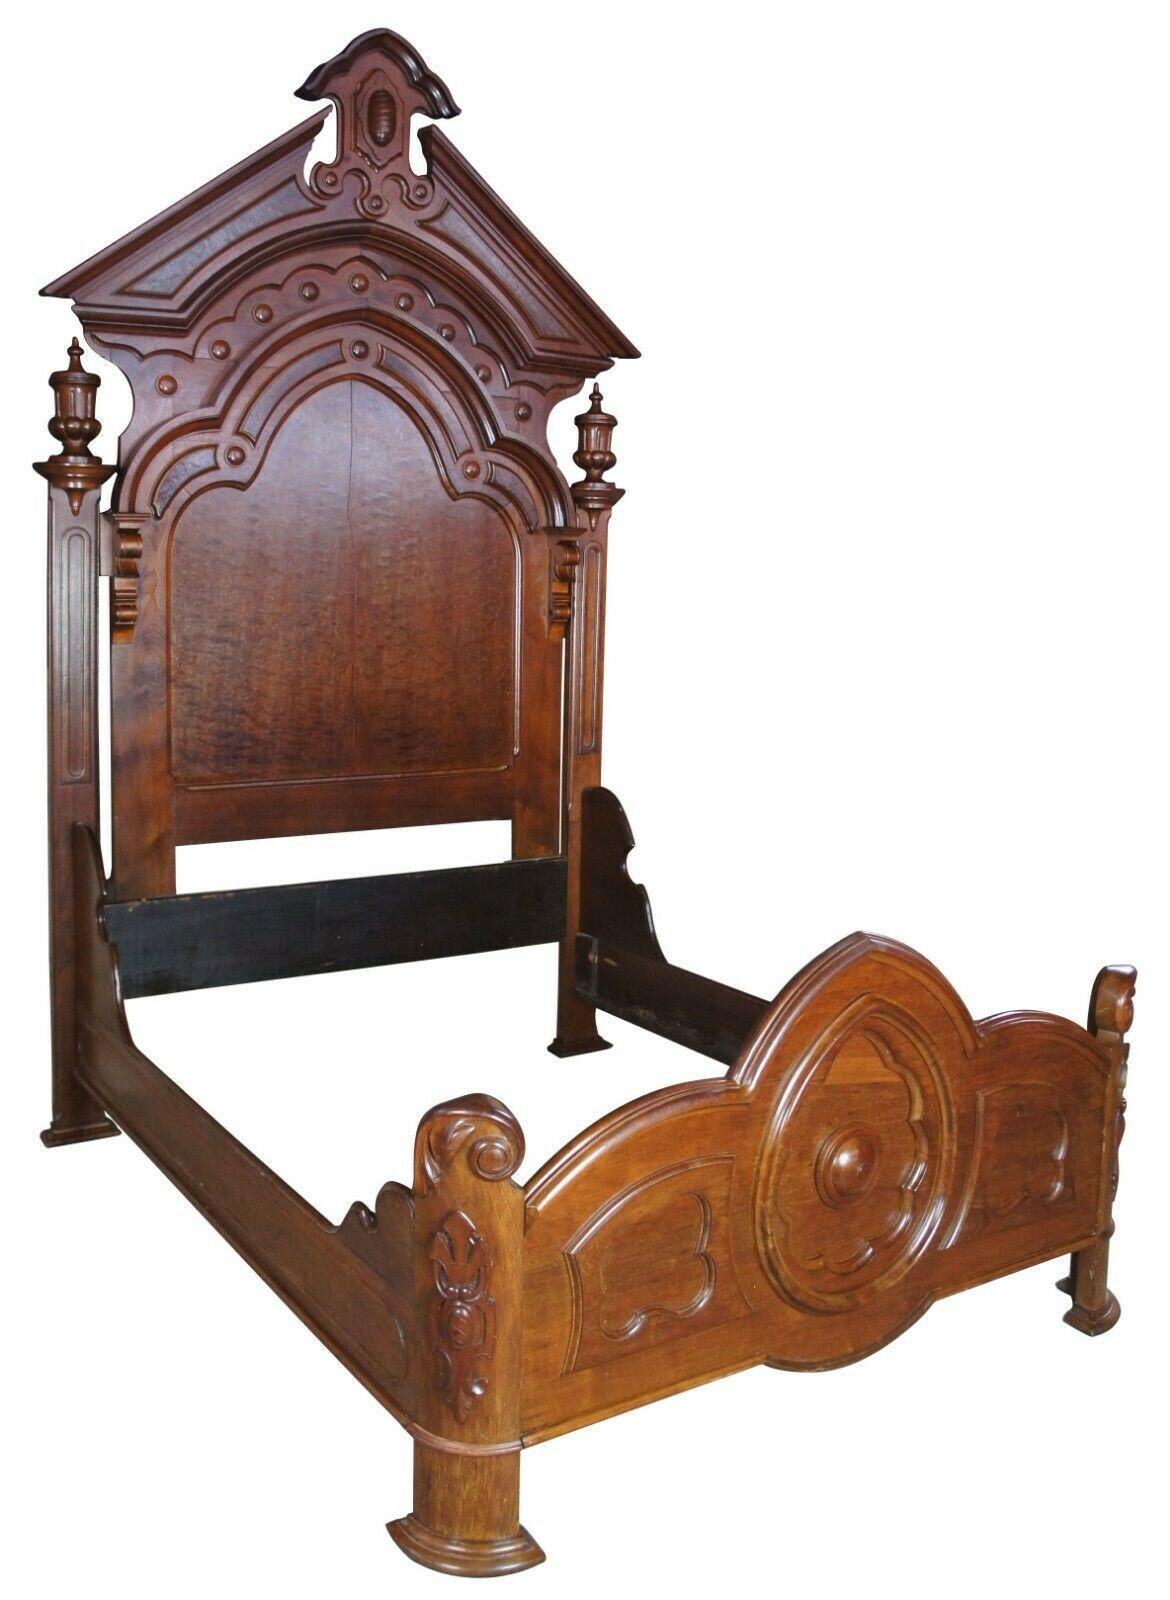 Up for consideration is a gorgeous Victorian bedroom set.
Includes;

Gentleman's dresser
&
Lincoln Style Bed

The dresser is made from walnut with burled trim, carved handles, and other ornate accents. Features a grand mirror with pierced